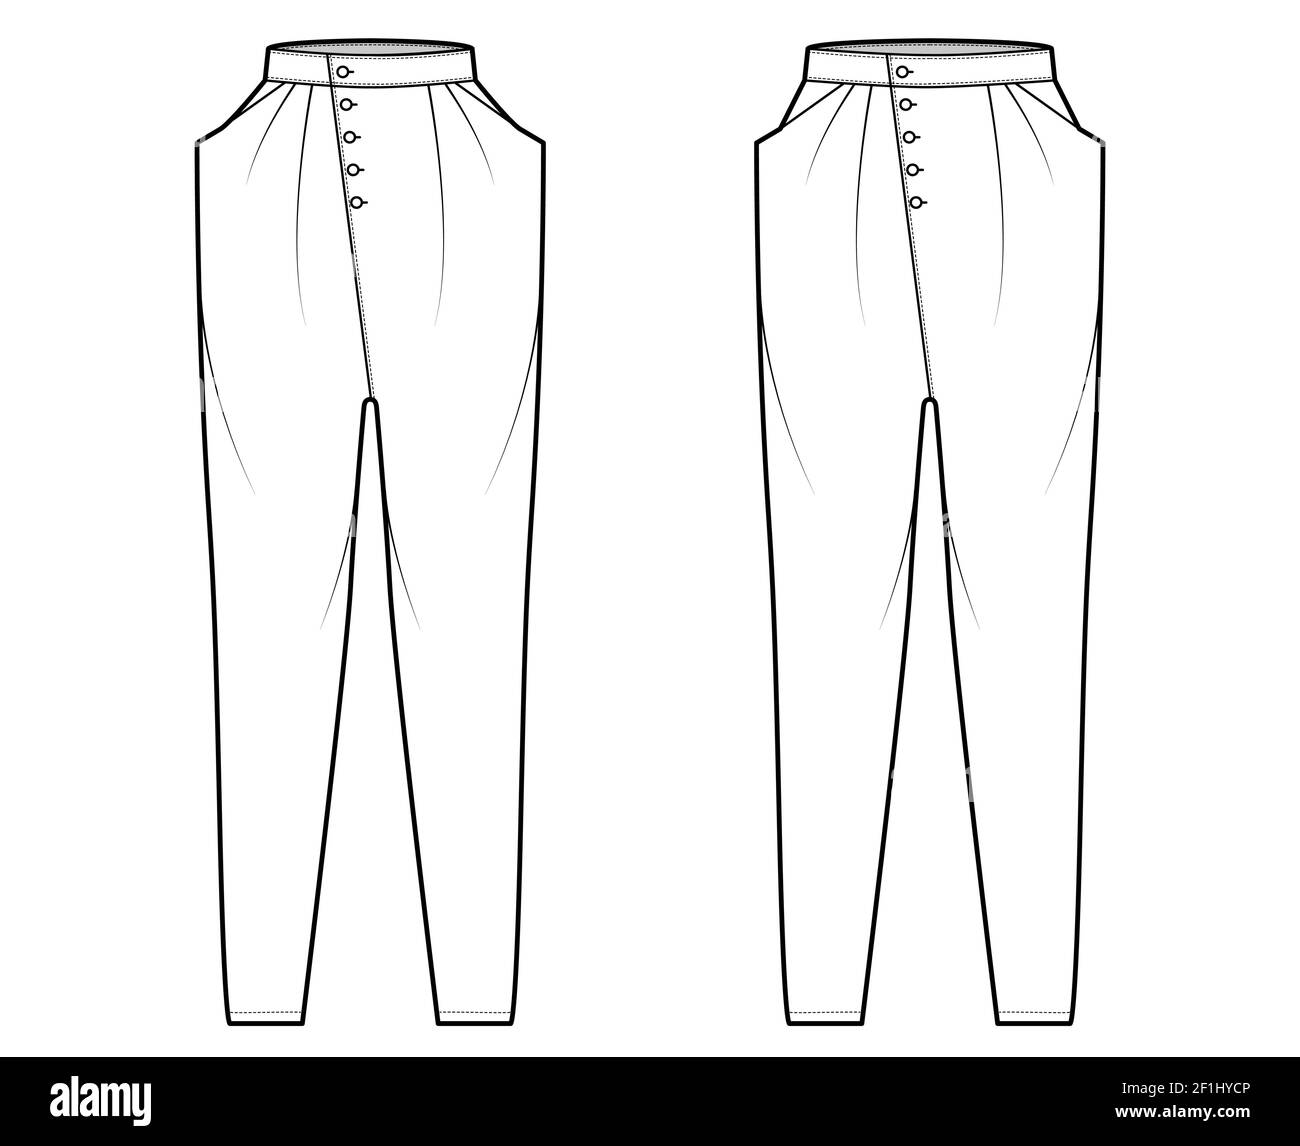 https://c8.alamy.com/comp/2F1HYCP/set-of-tapered-baggy-pants-technical-fashion-illustration-with-low-normal-waist-high-rise-slash-pockets-draping-front-flat-apparel-template-white-color-style-women-men-unisex-cad-mockup-2F1HYCP.jpg